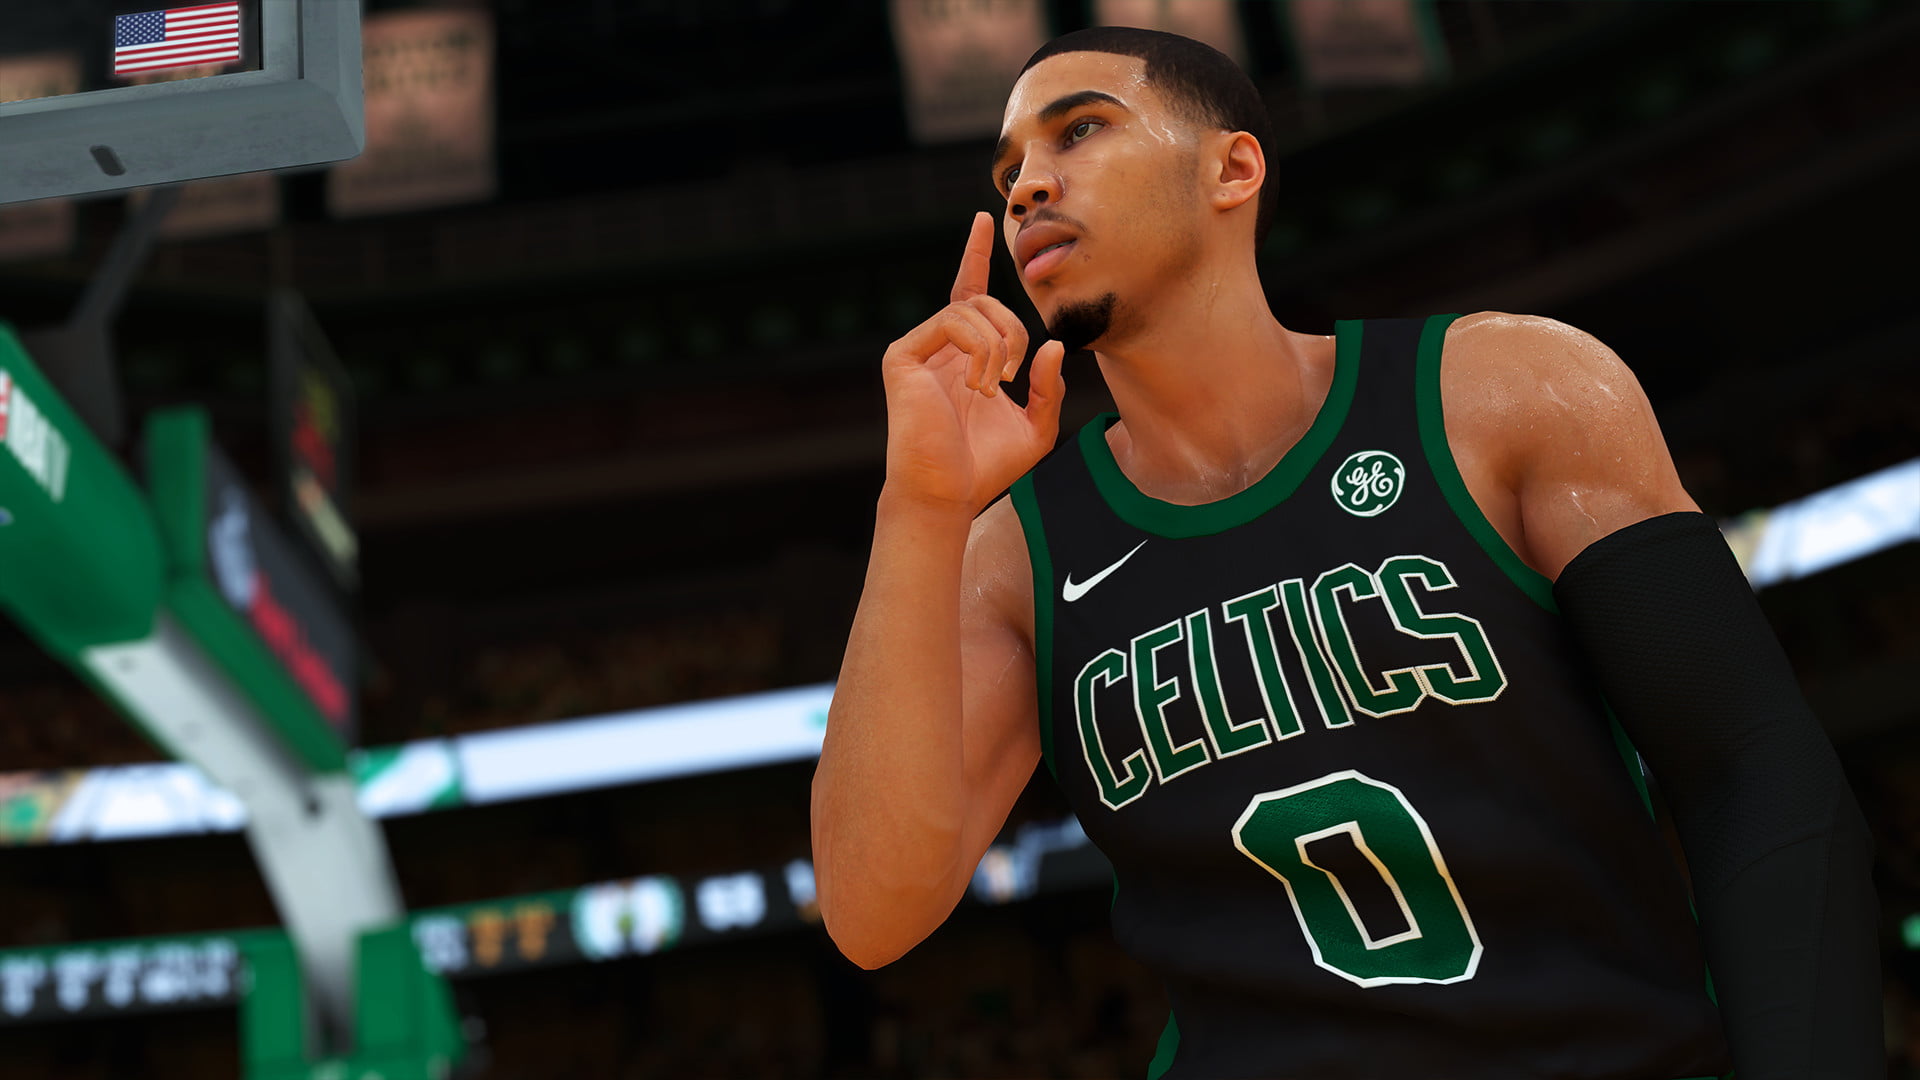 2K Sports Releases NBA 2K19 Gameplay Video.